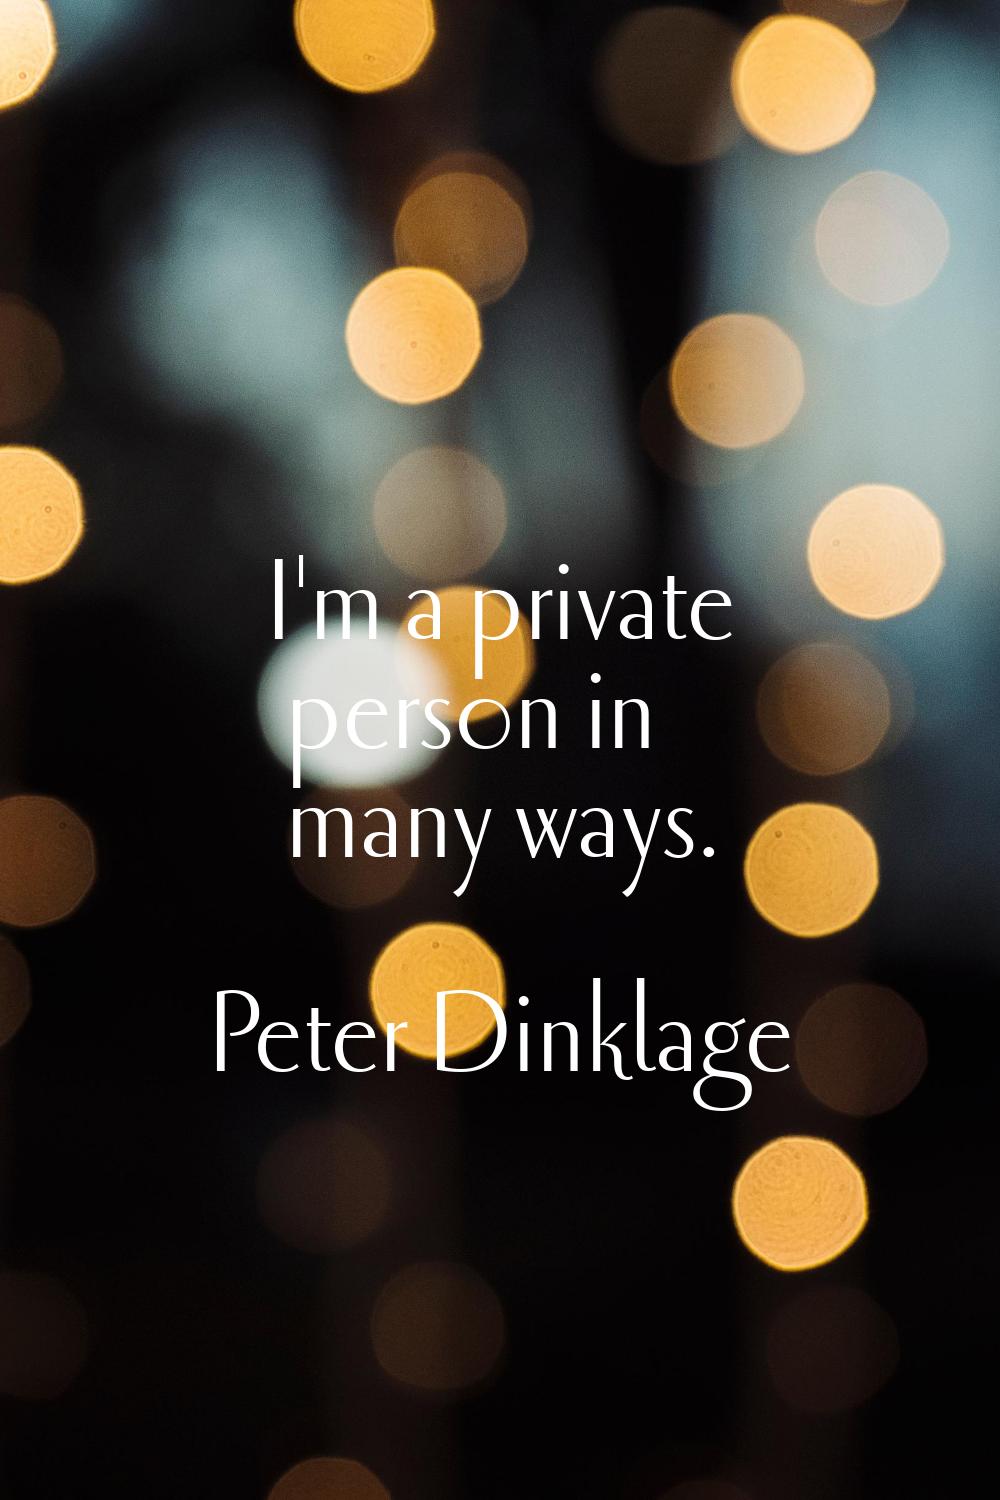 I'm a private person in many ways.